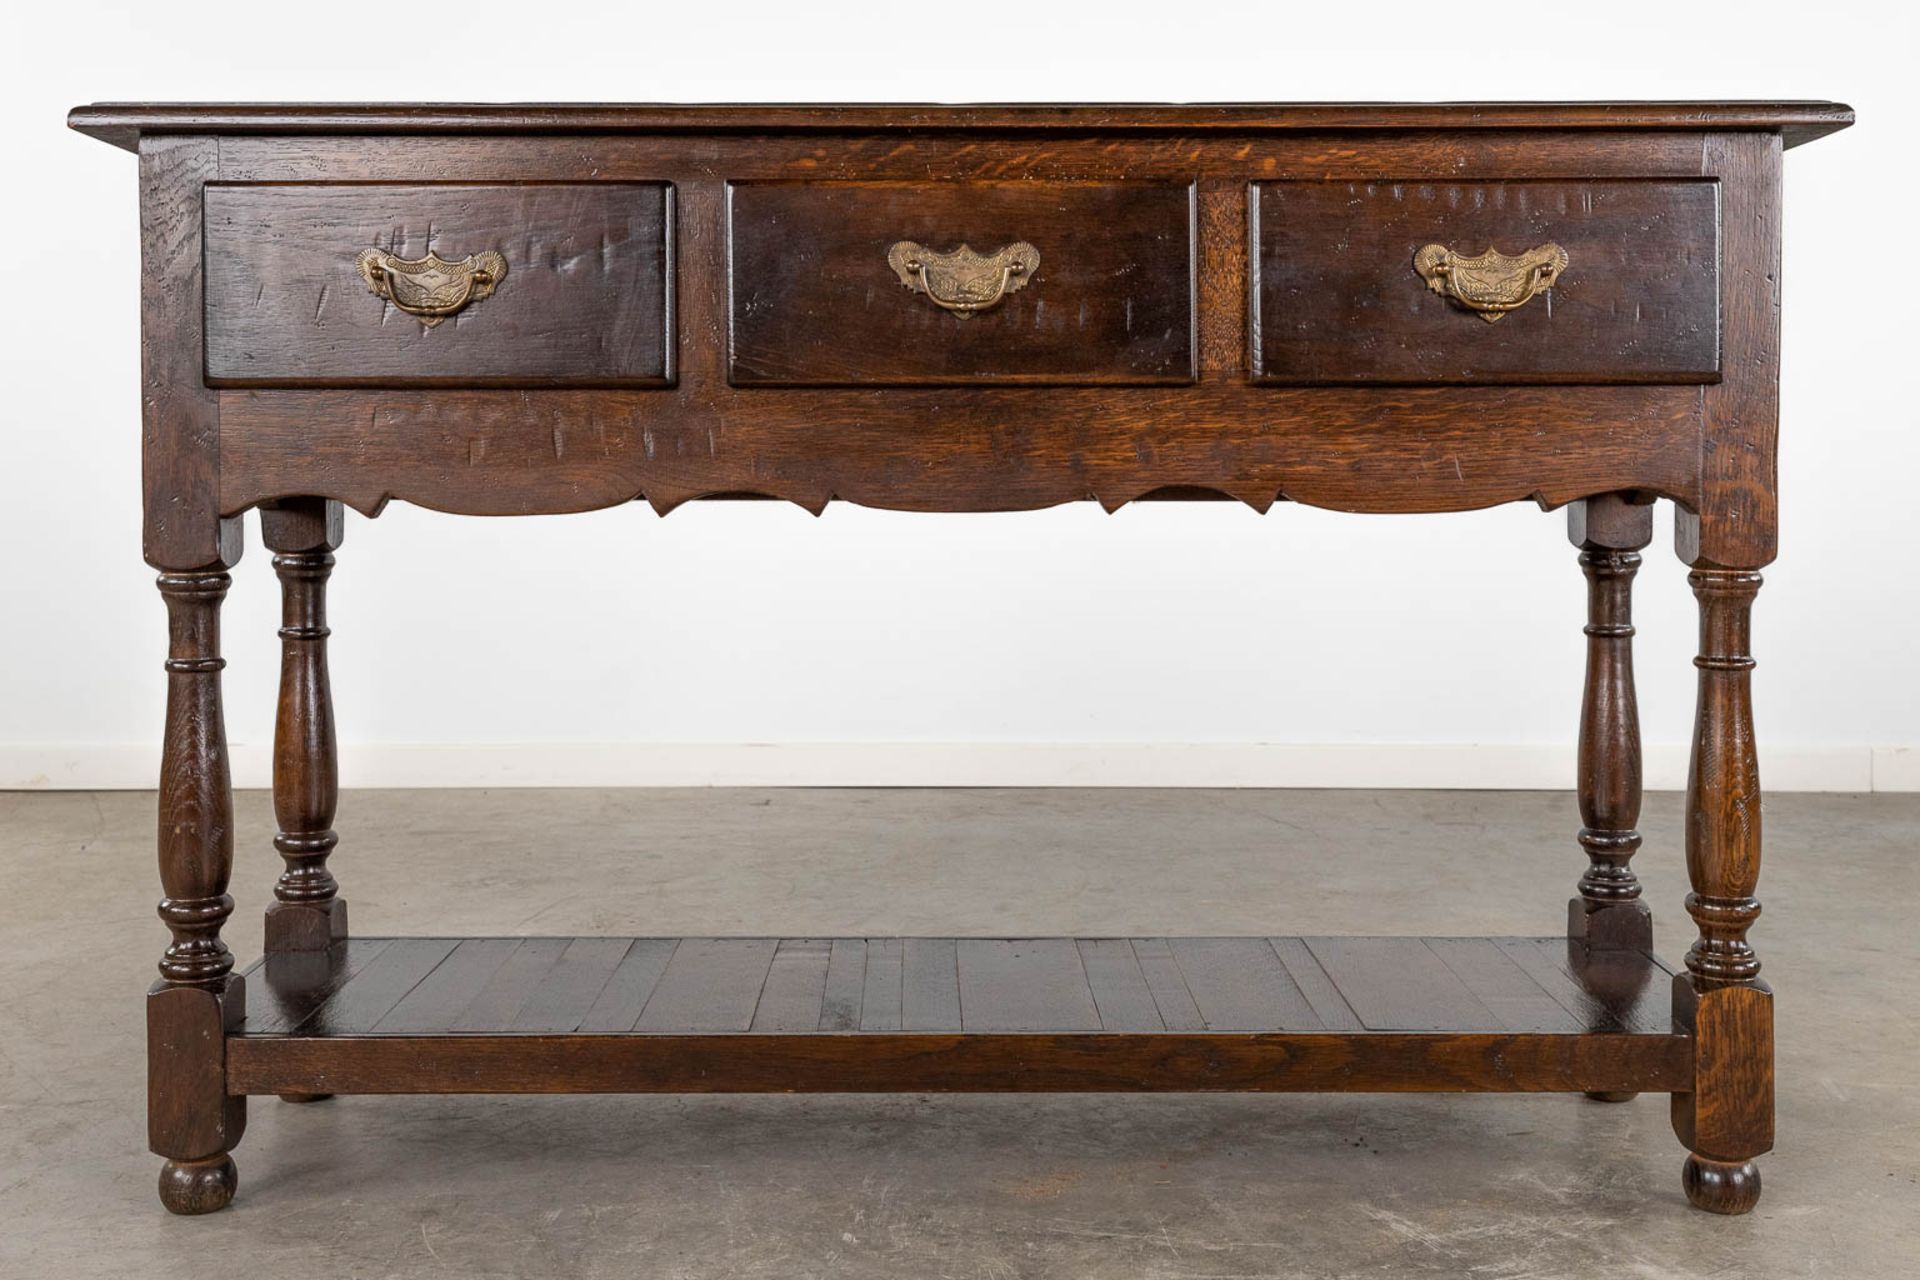 An English console table with 3 drawers. 20th C. (D:35 x W:120 x H:77 cm) - Image 4 of 8